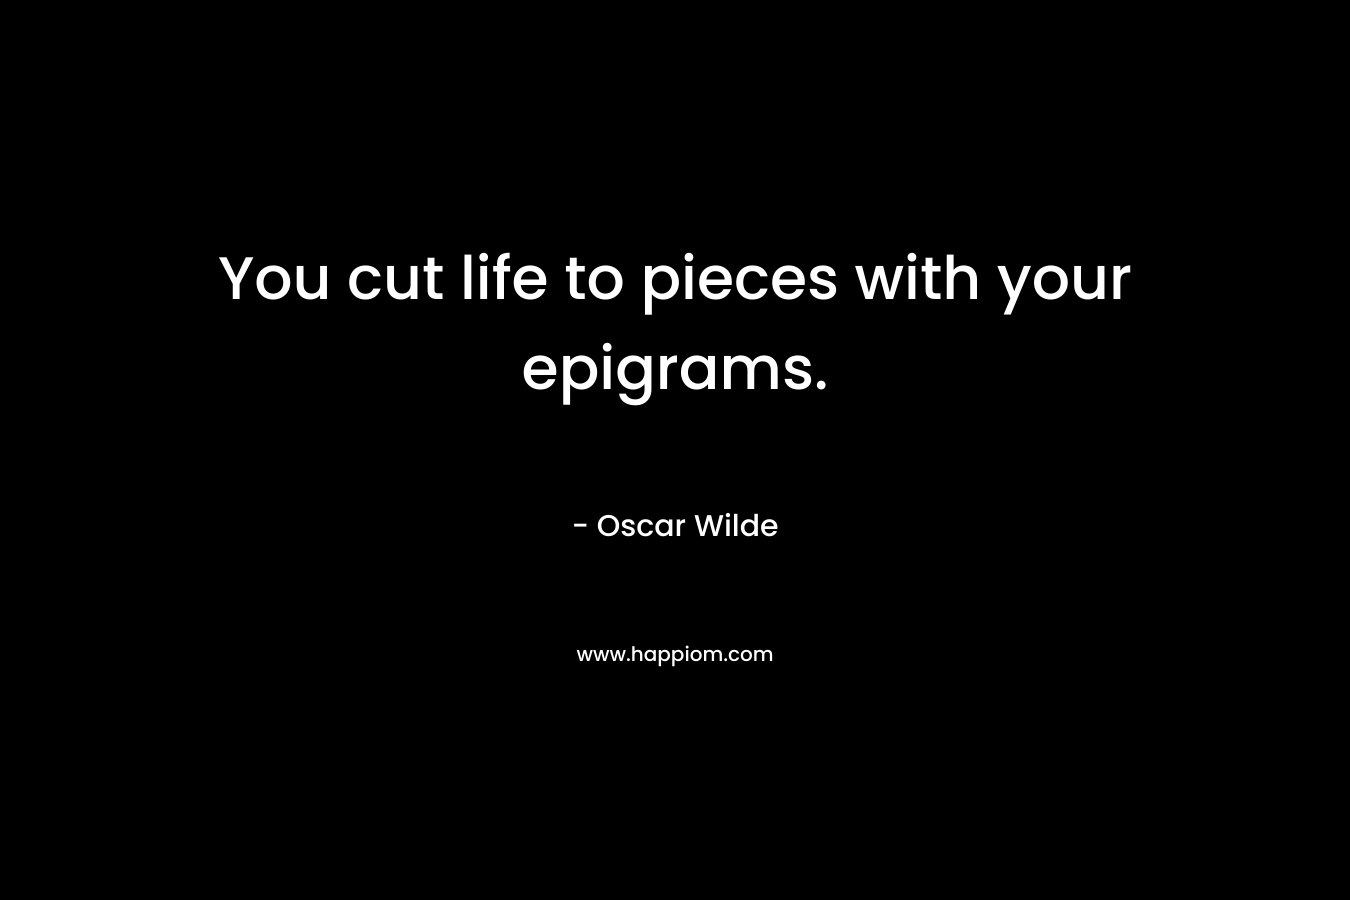 You cut life to pieces with your epigrams. – Oscar Wilde